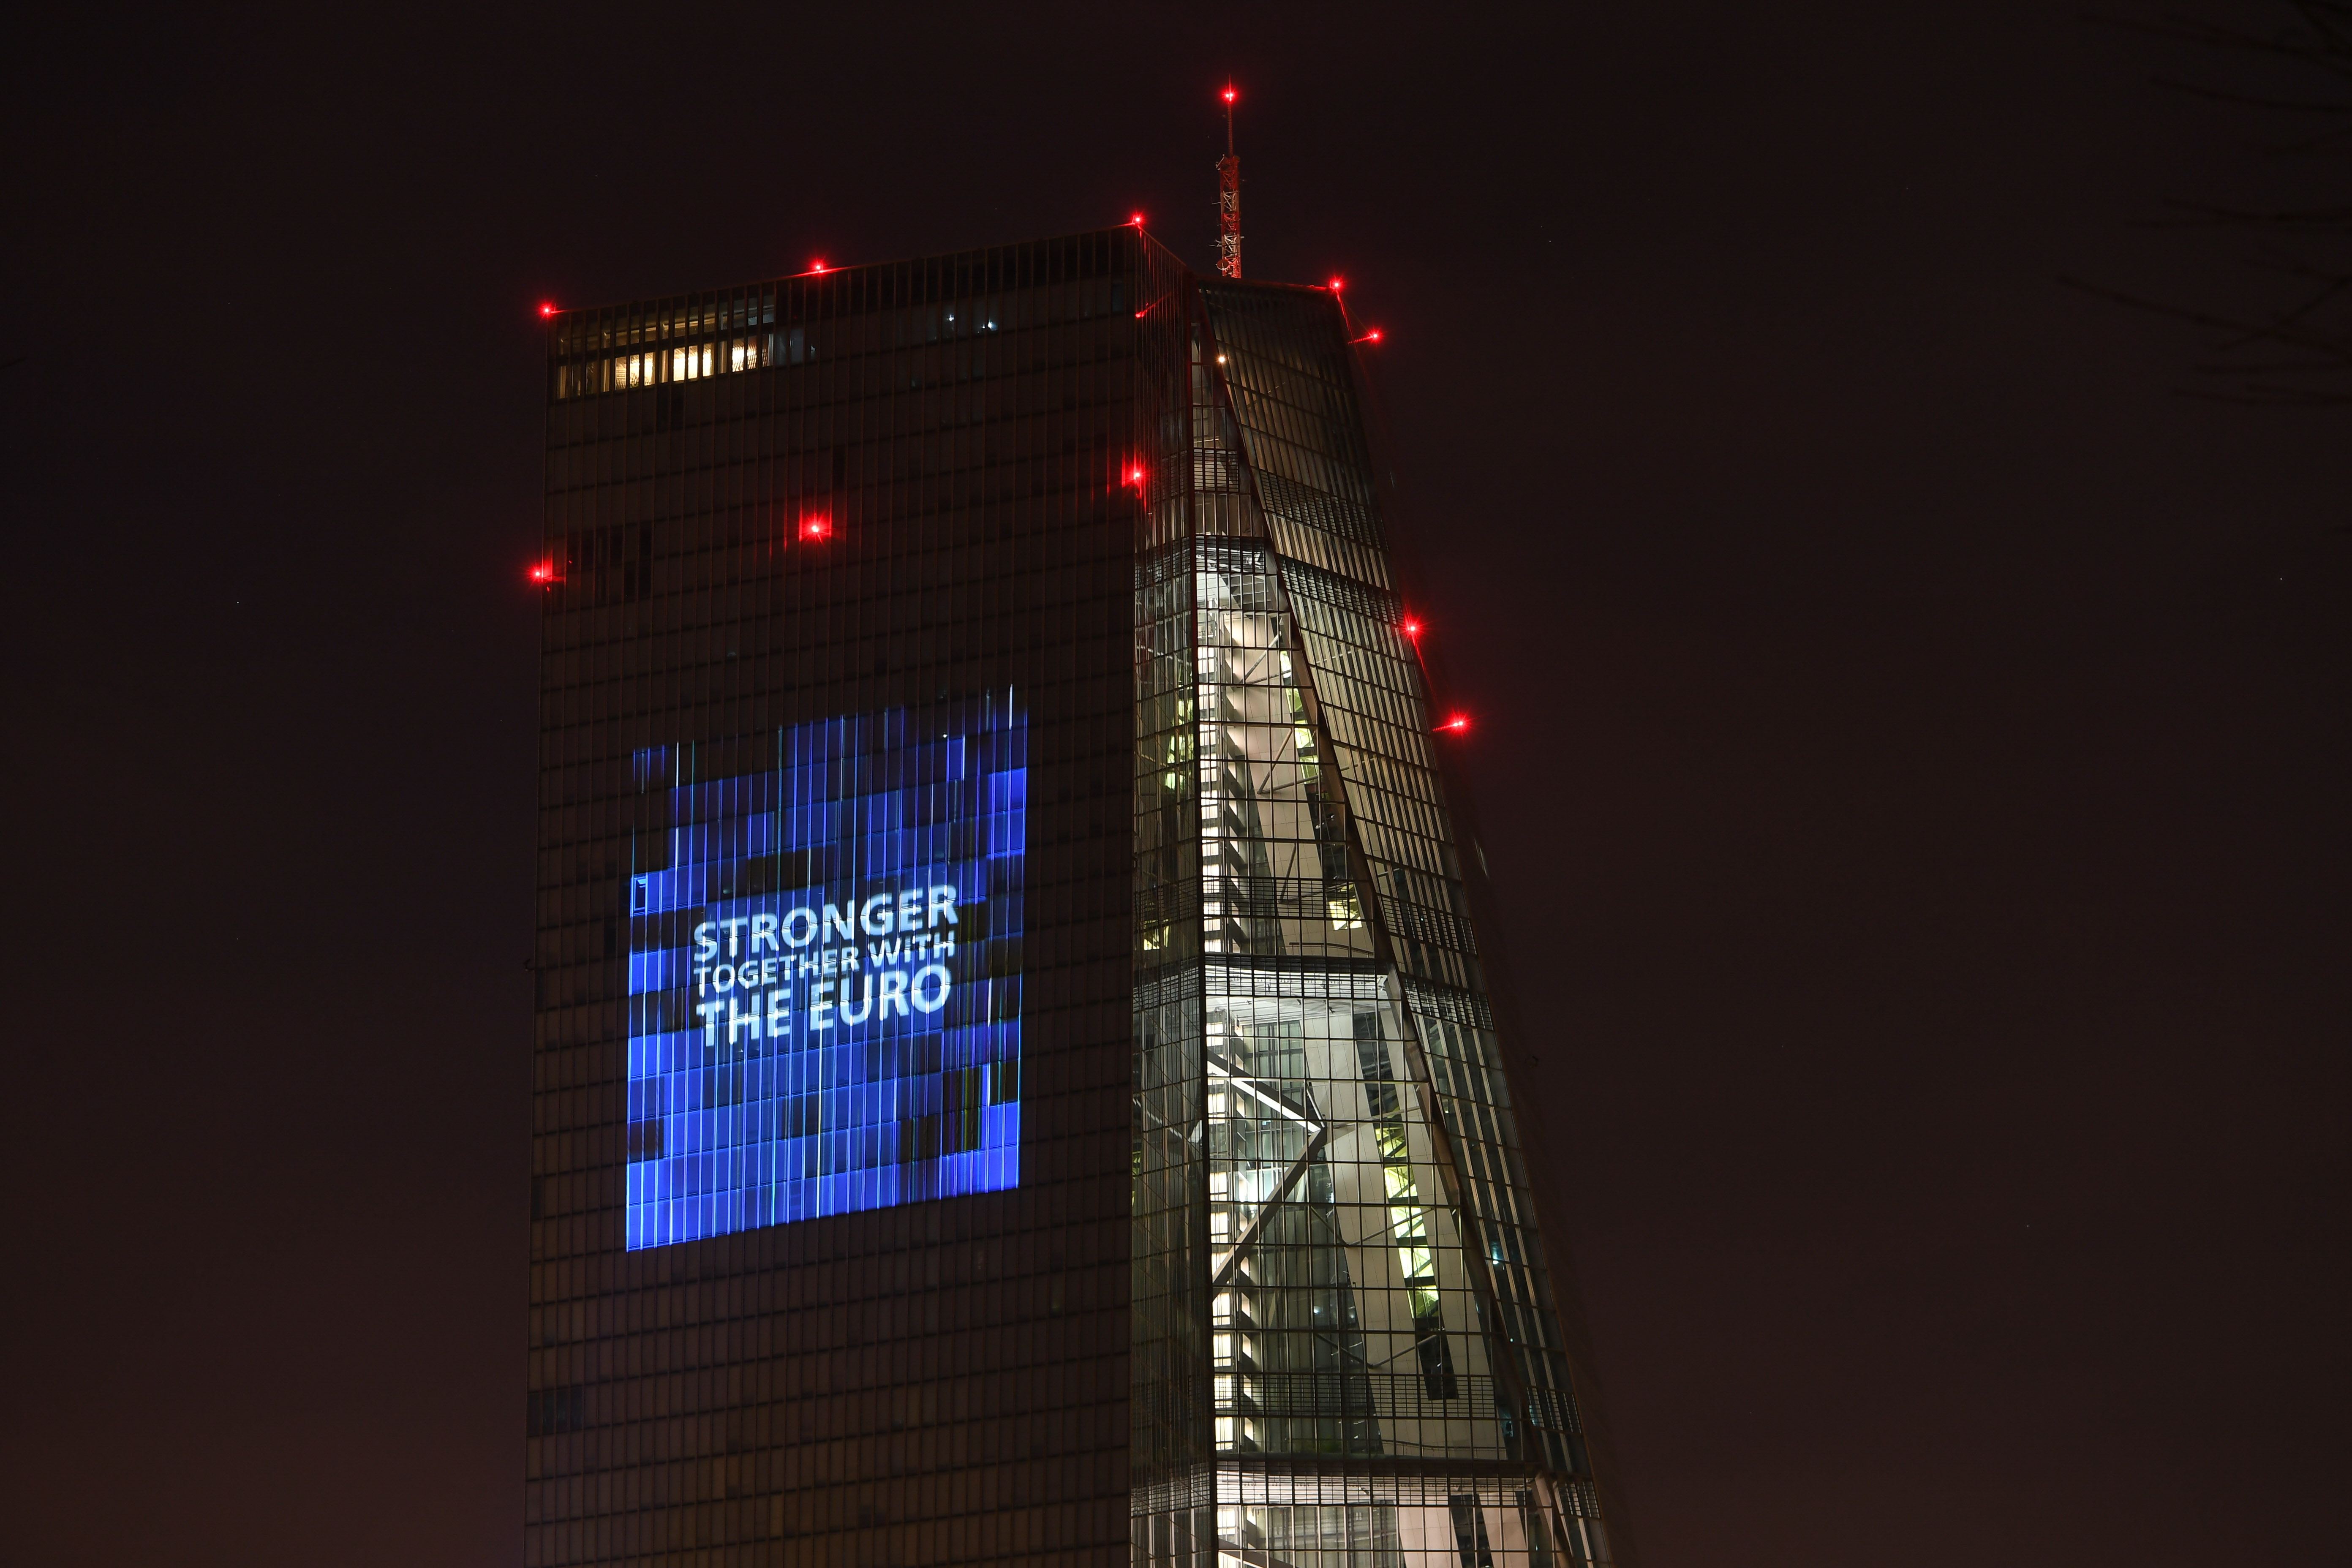 Photo taken on Jan. 1, 2022 shows the headquarters of the European Central Bank illuminated to celebrate the 20th anniversary of Euro banknotes and coins in Frankfurt, Germany.